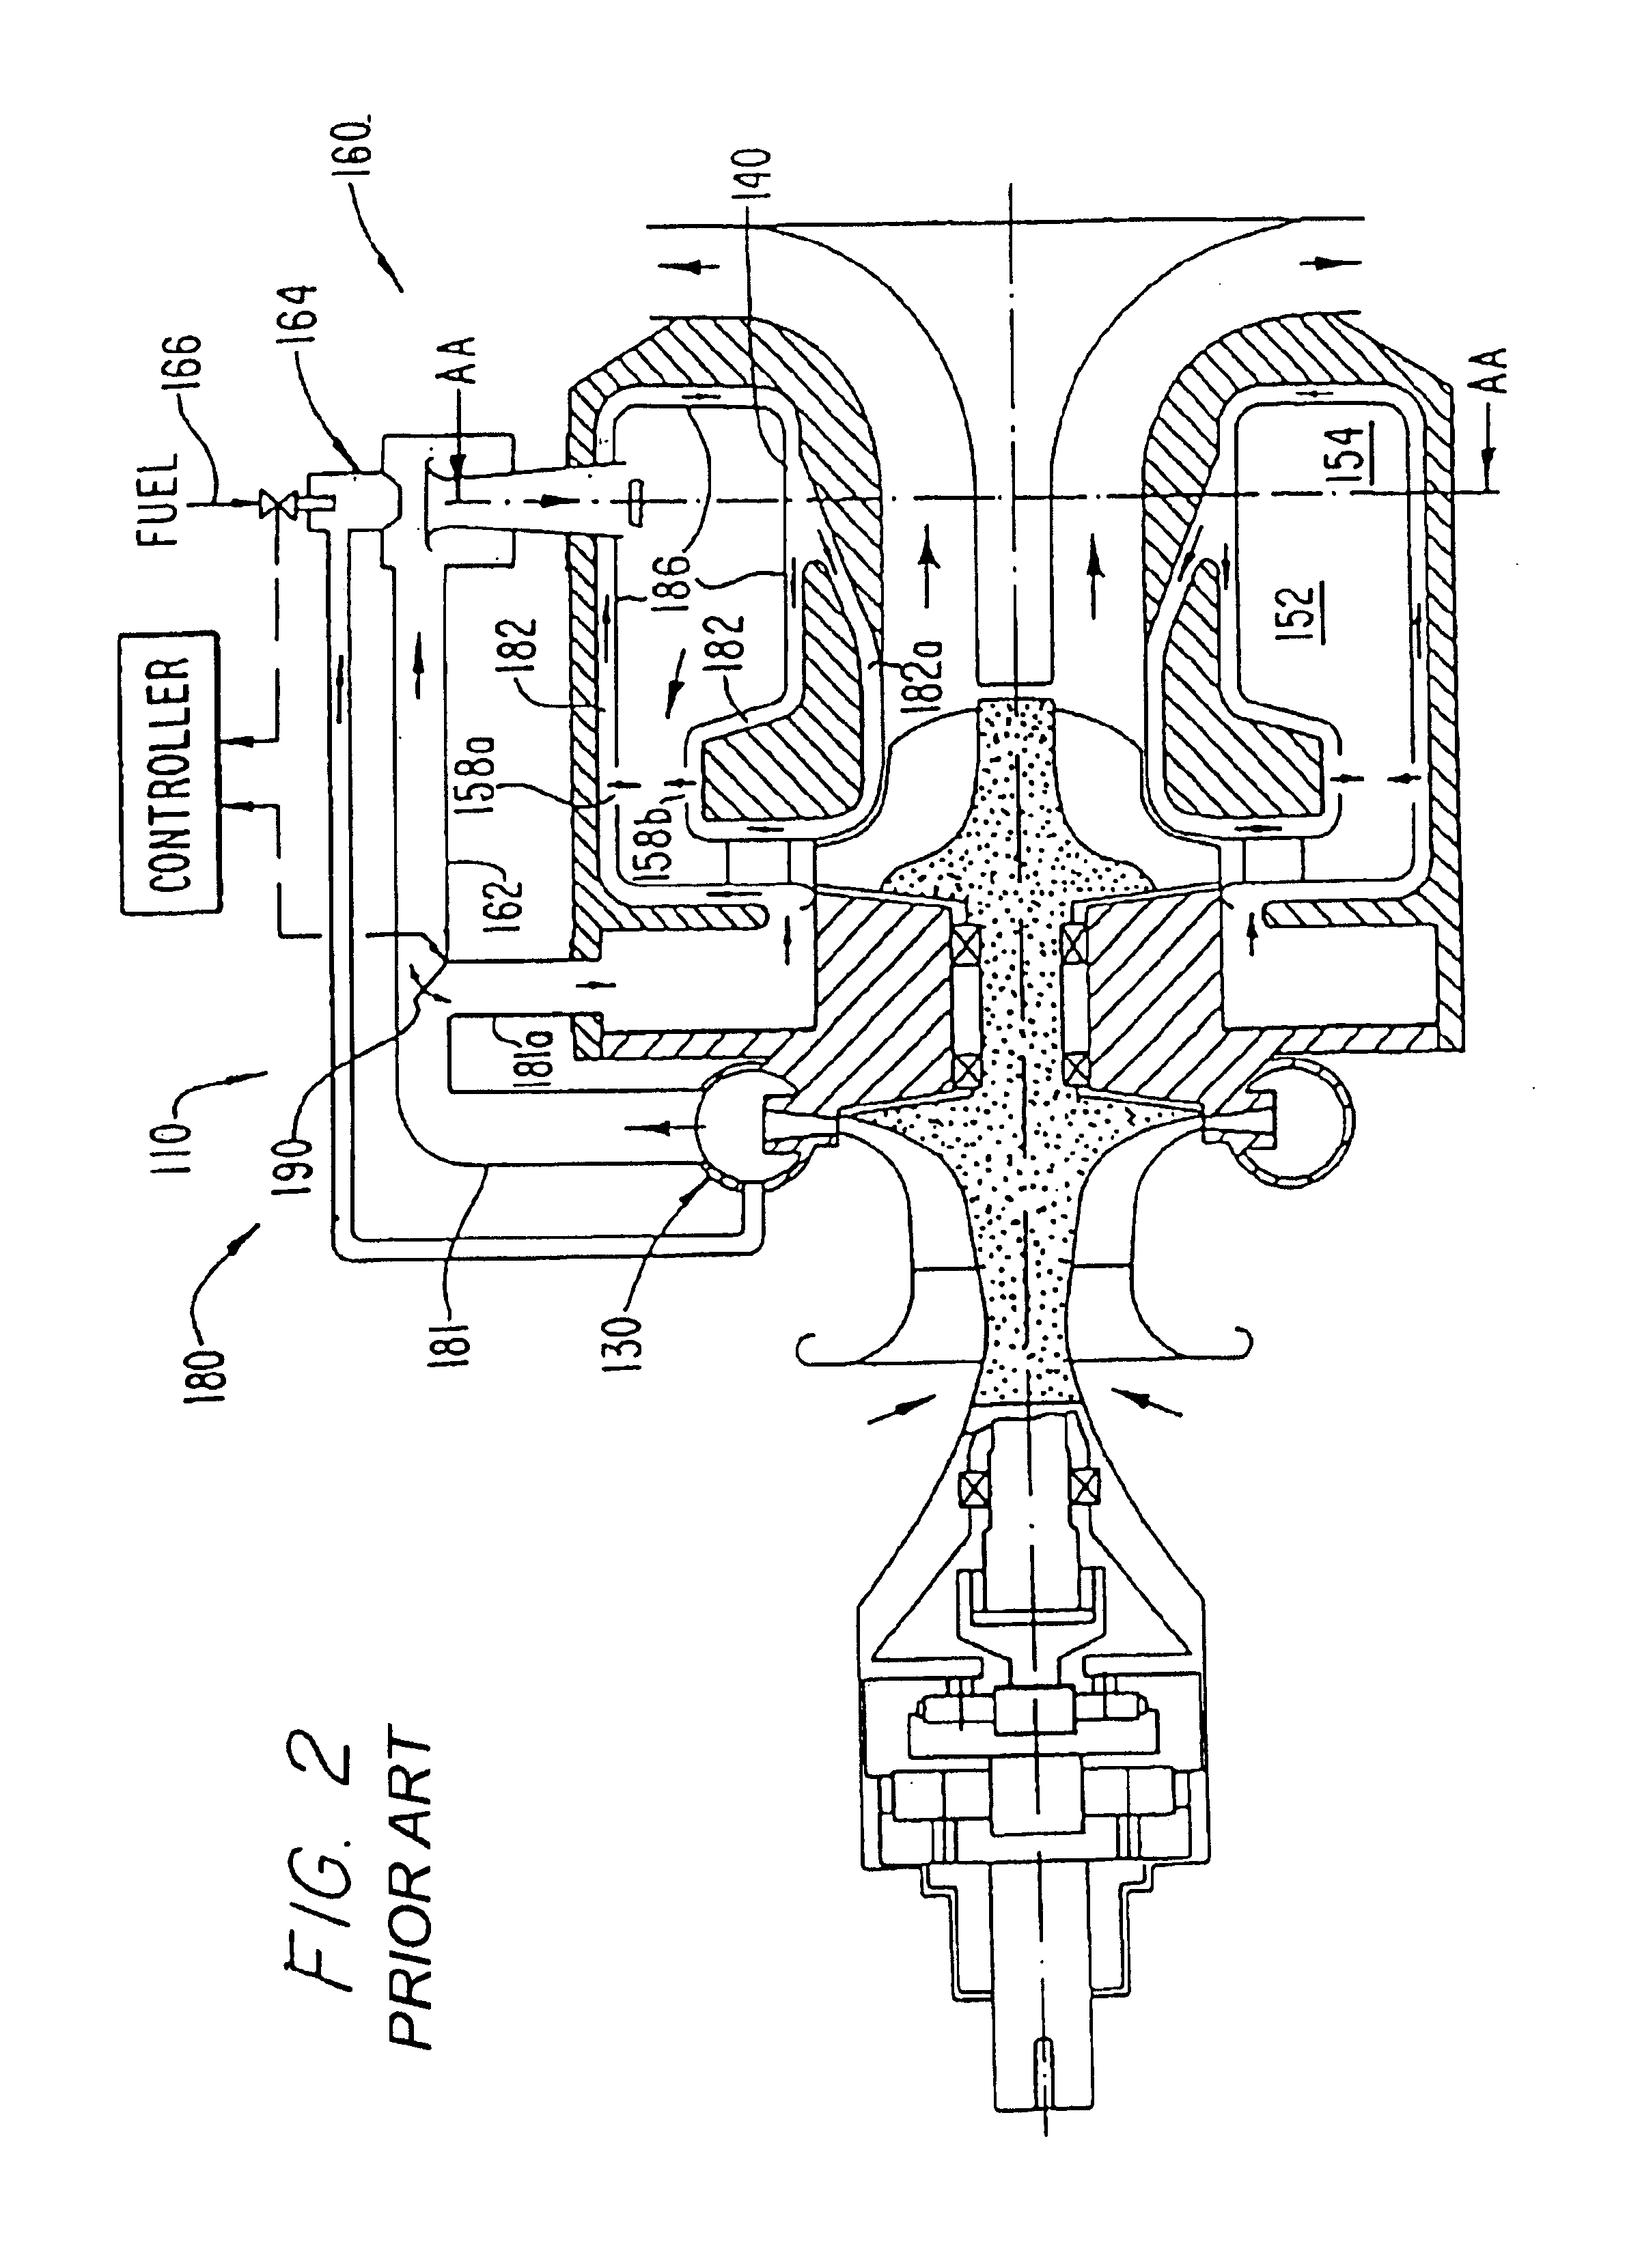 Gas turbine engine fuel/air premixers with variable geometry exit and method for controlling exit velocities